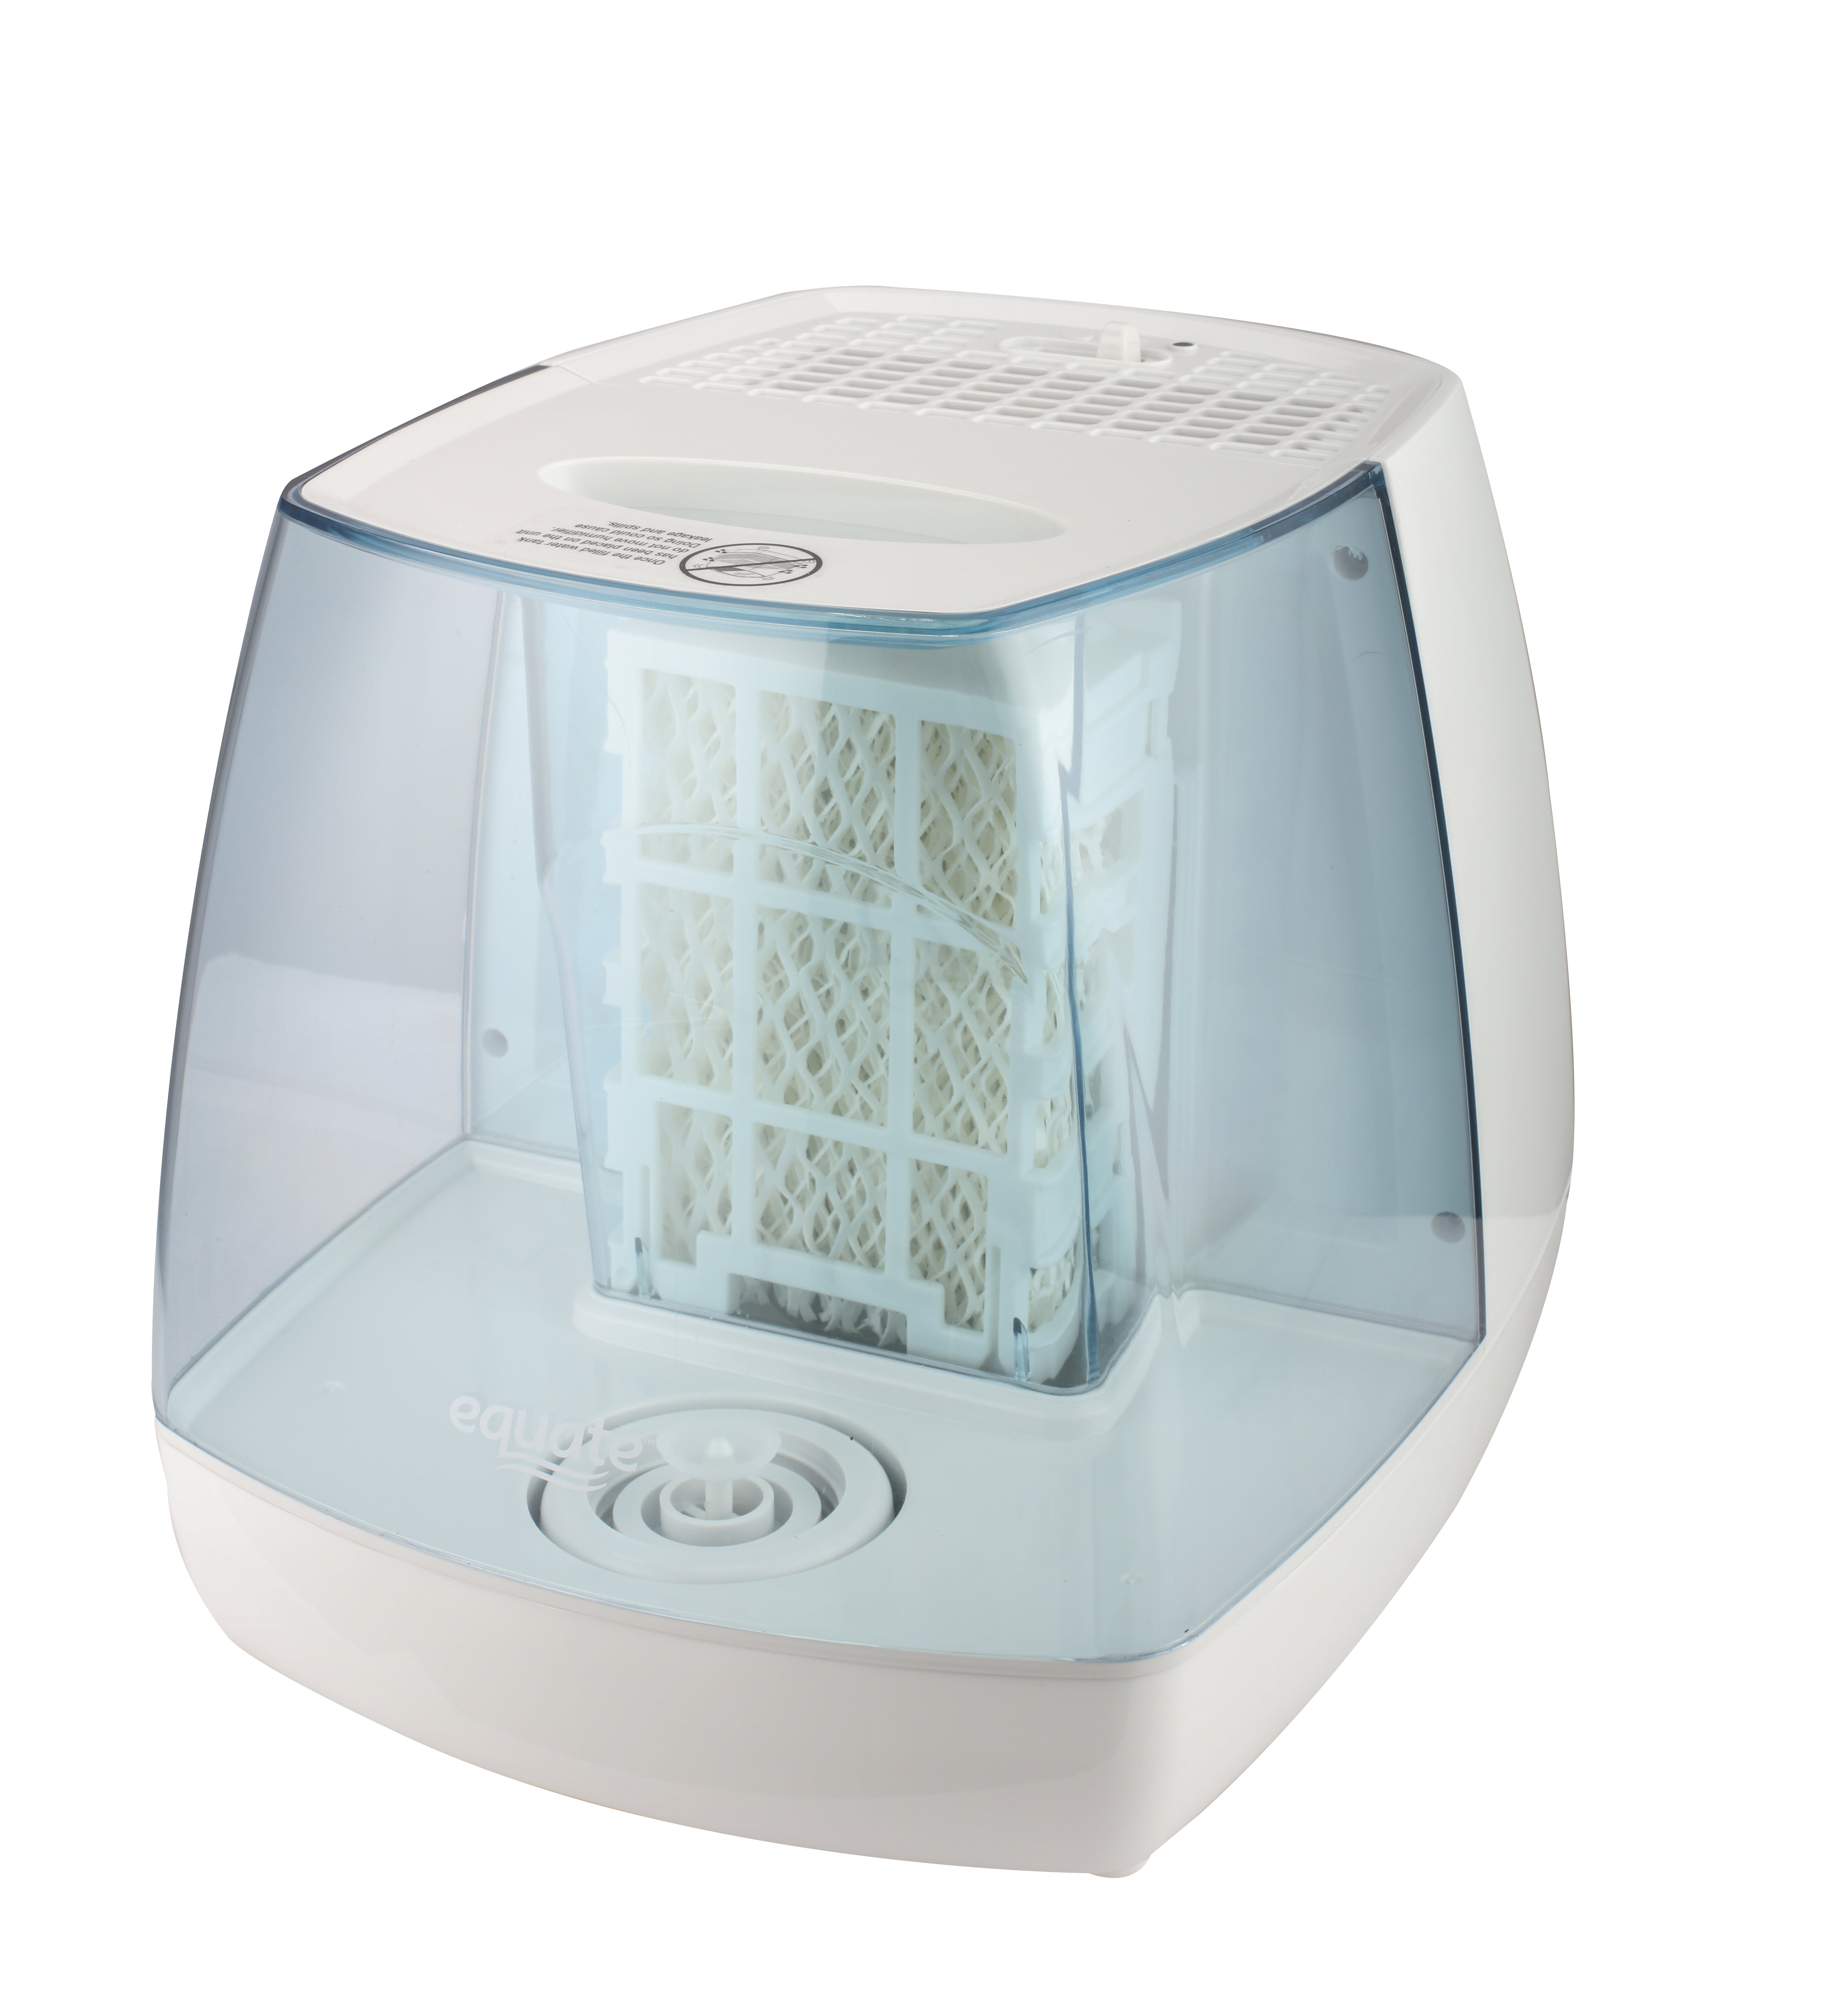 Equate Replacement Humidifier Filter for Use with Cool Mist Humidifiers for sale online